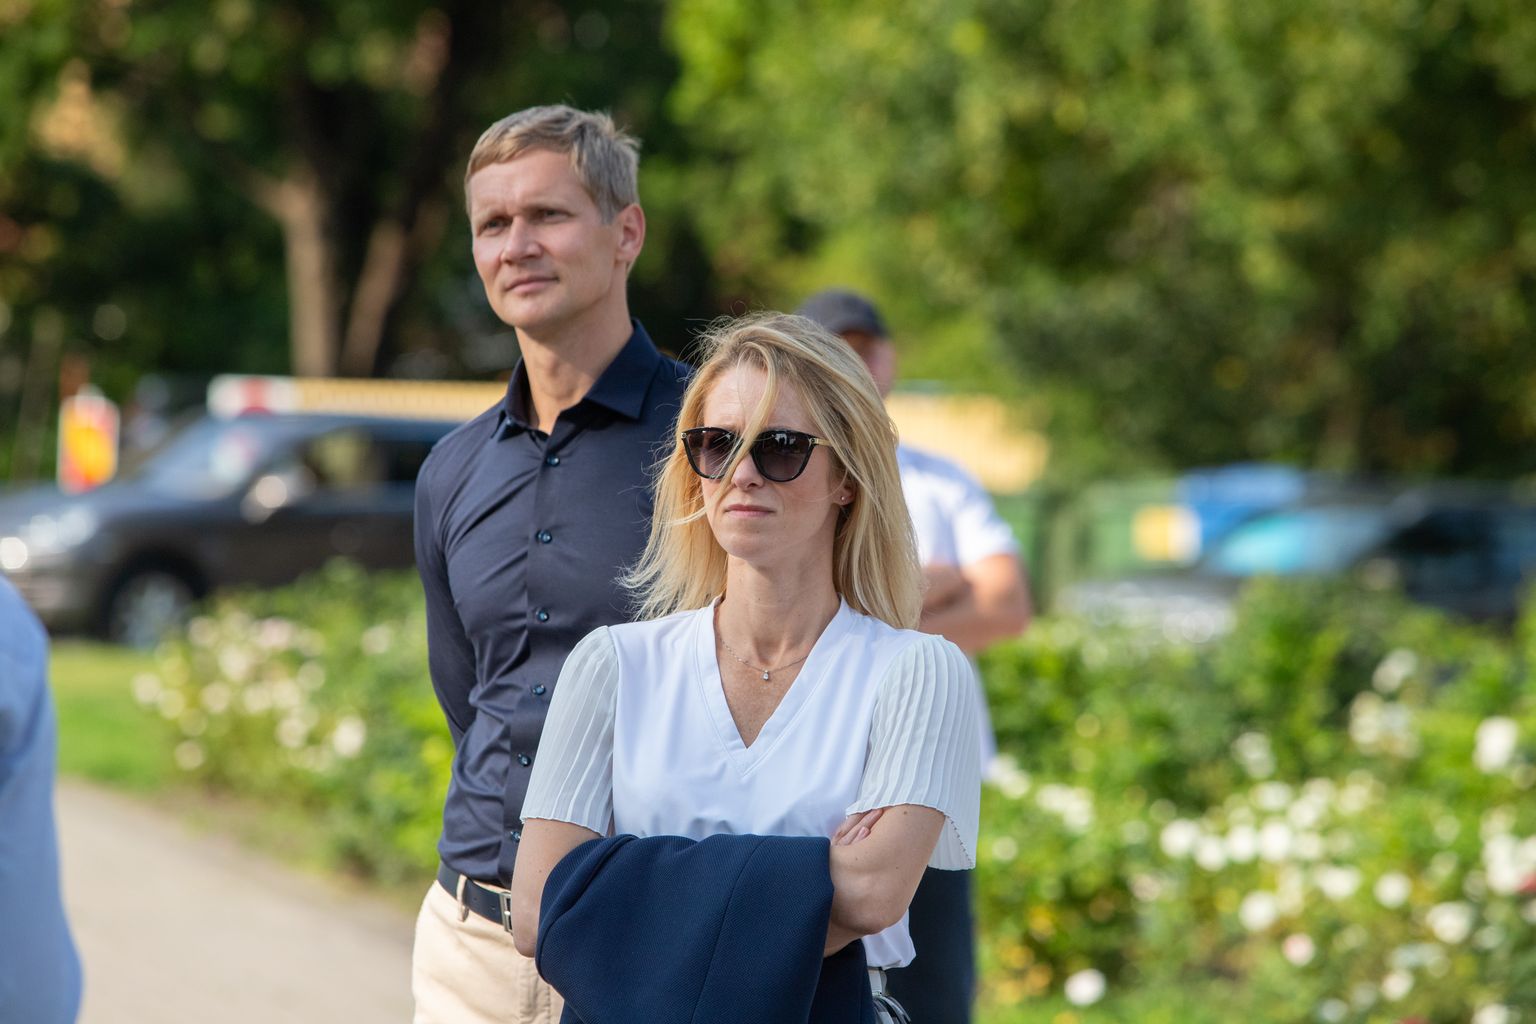 Estonian Prime Minister Kaja Kallas' husband Arvo Hallik announced on Friday that he will sell all shares in Stark Logistics and withdraw from the company.